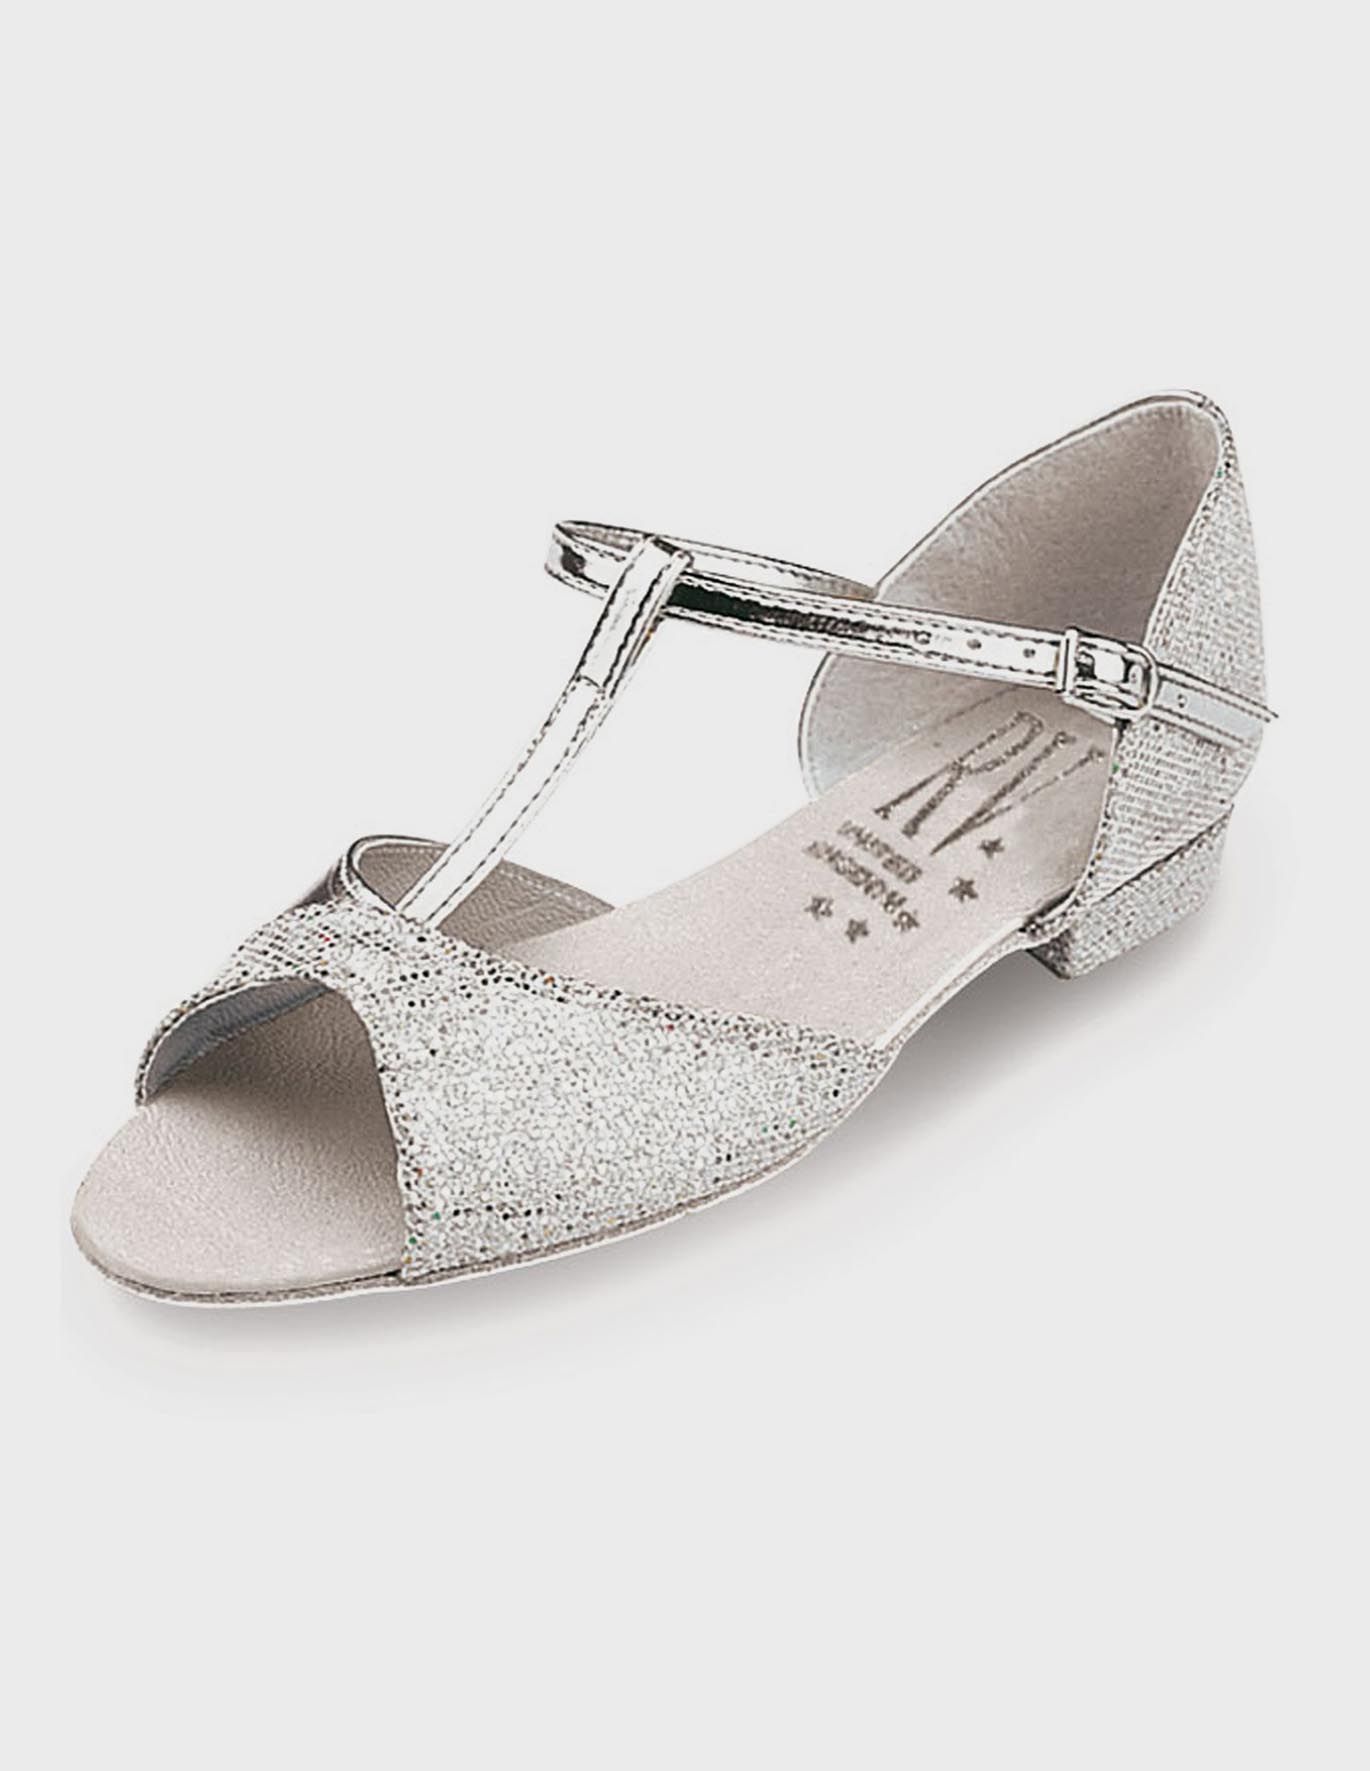 Roch Valley Stacey/S Childs Ballroom Shoe